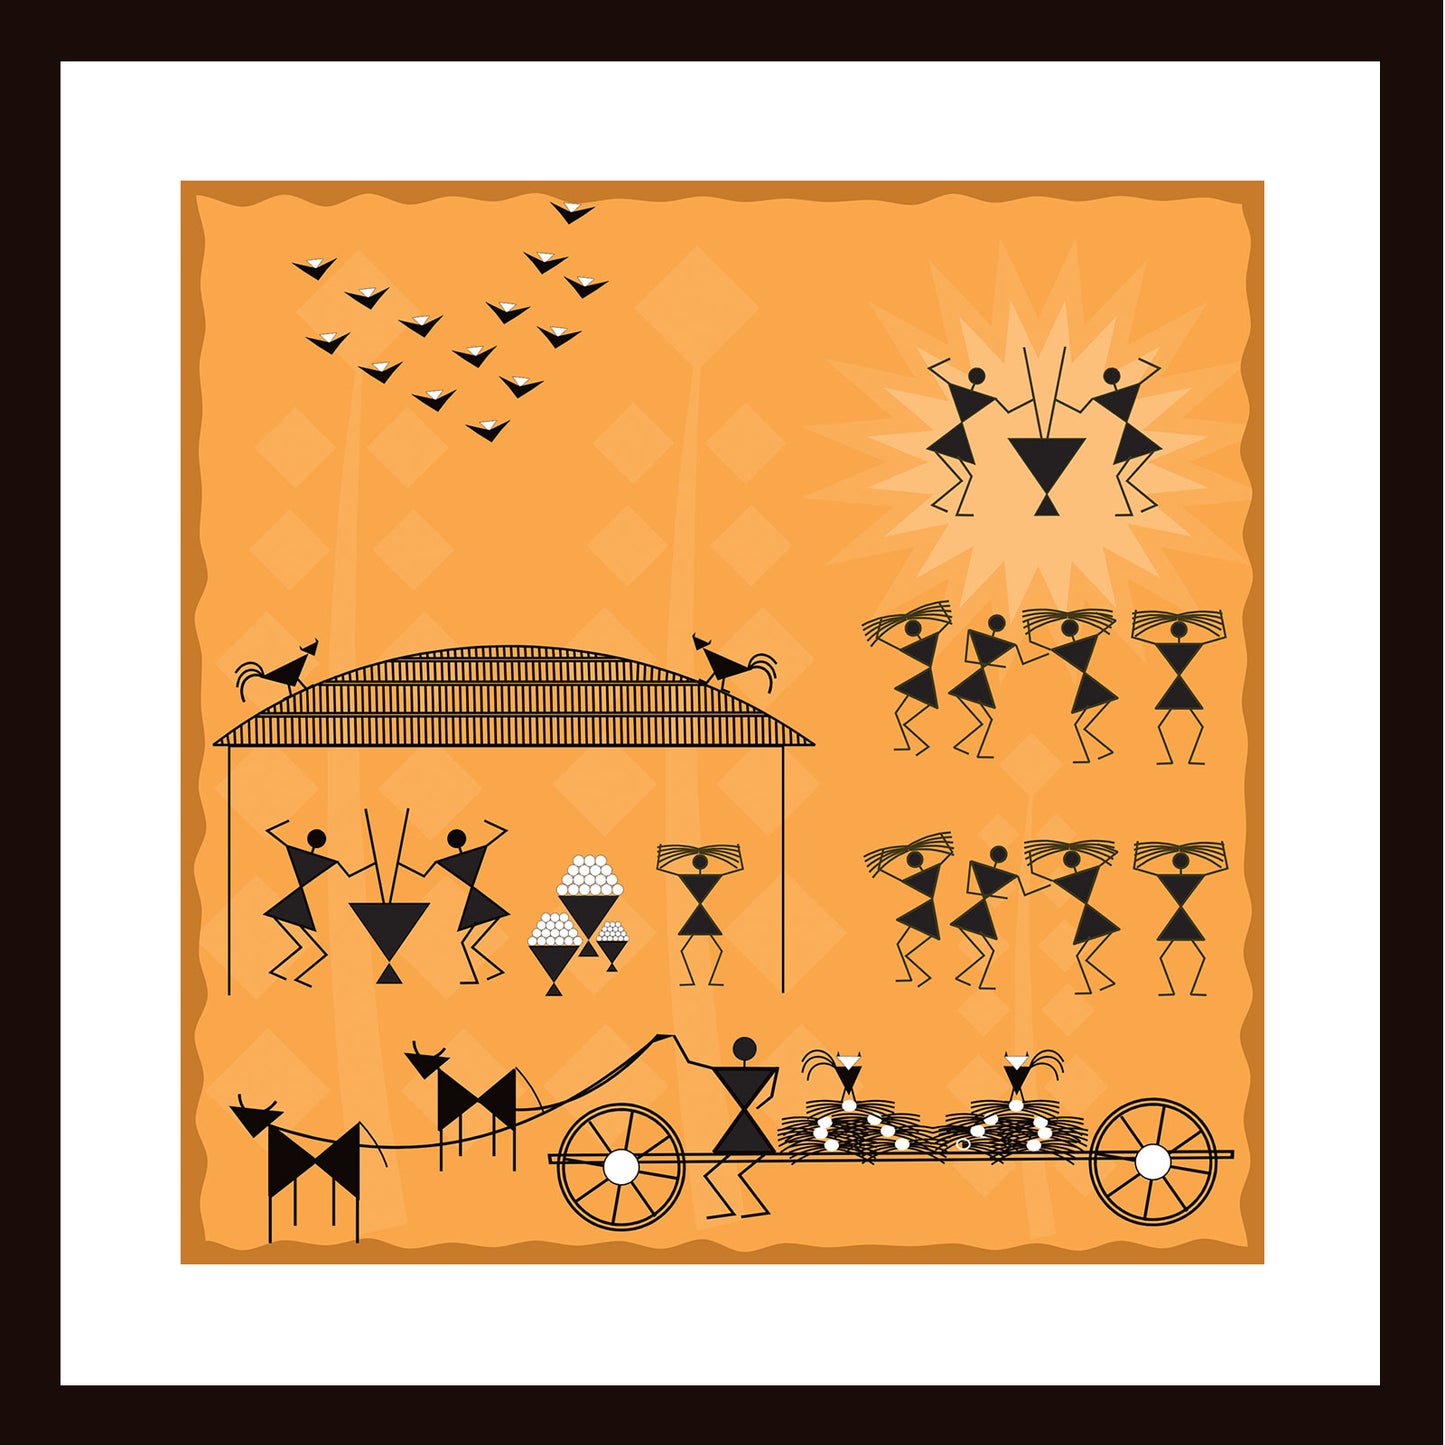 Wall Art - A Day in the Life of Warli